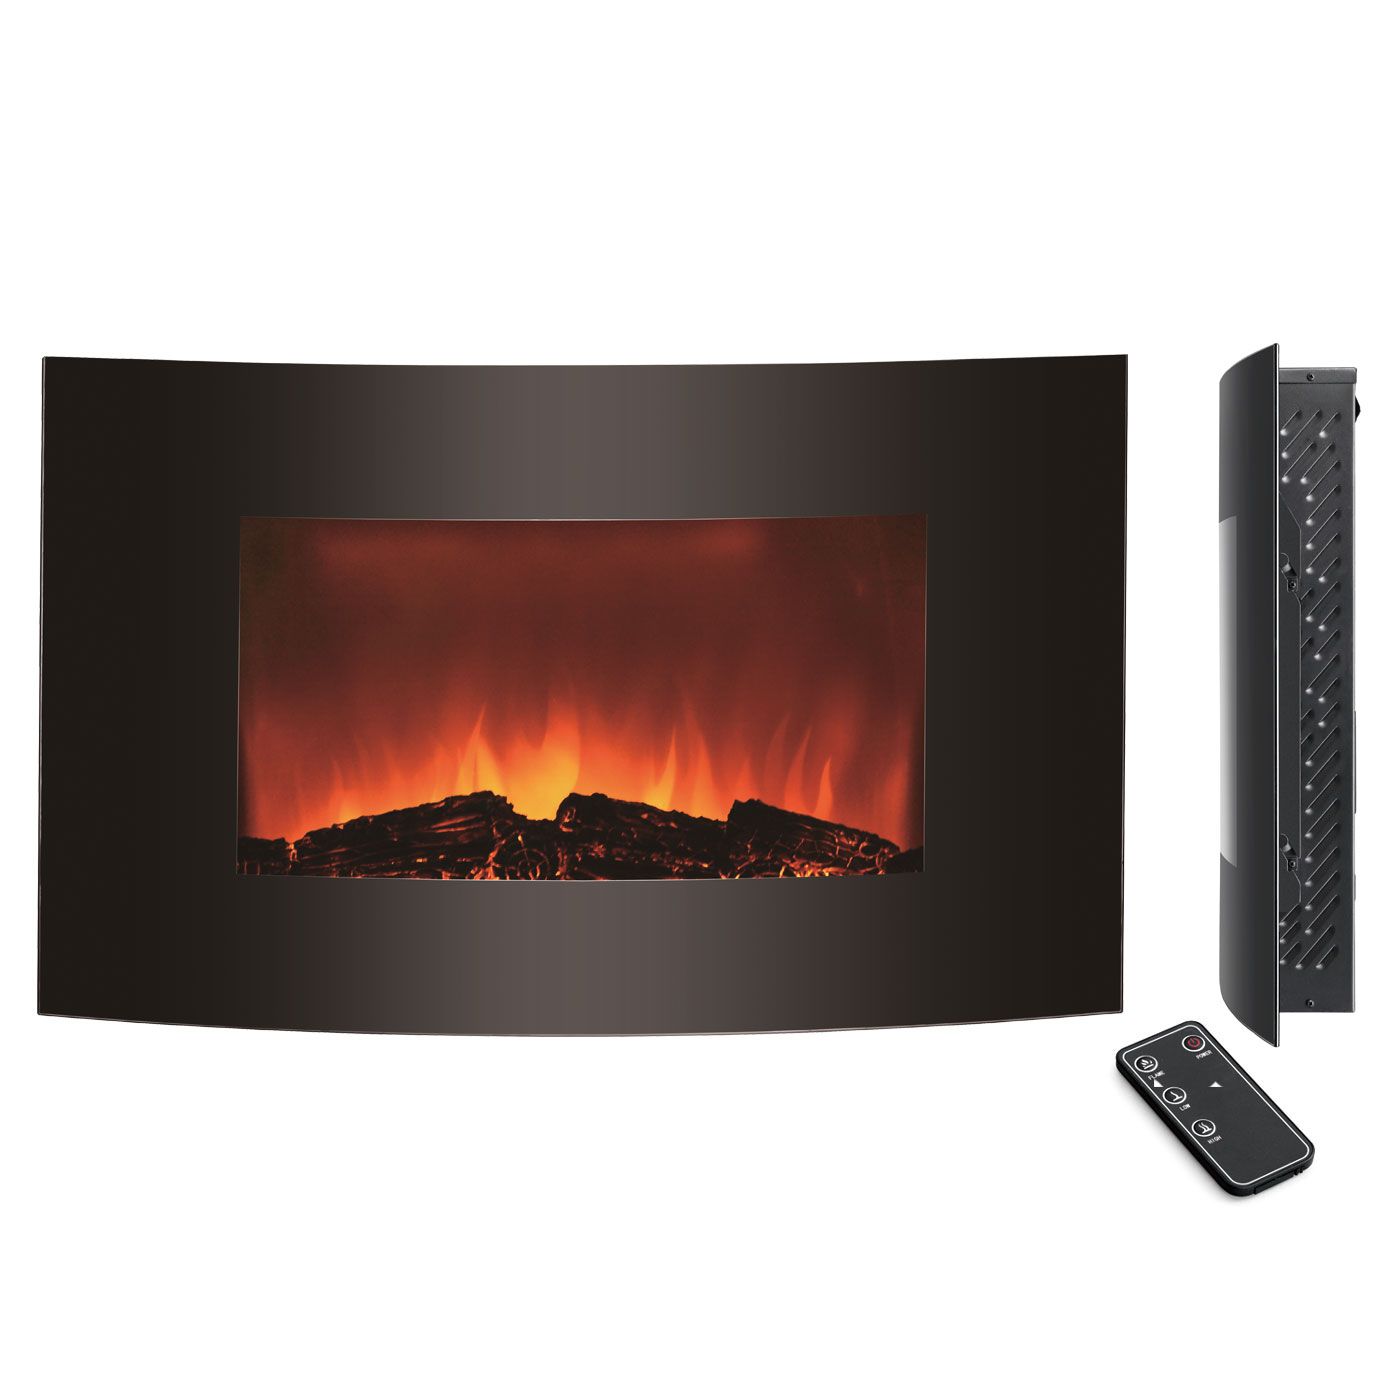 Curved Black Tempered Glass Panel Electrical Fireplace,Wall mounted Heater.